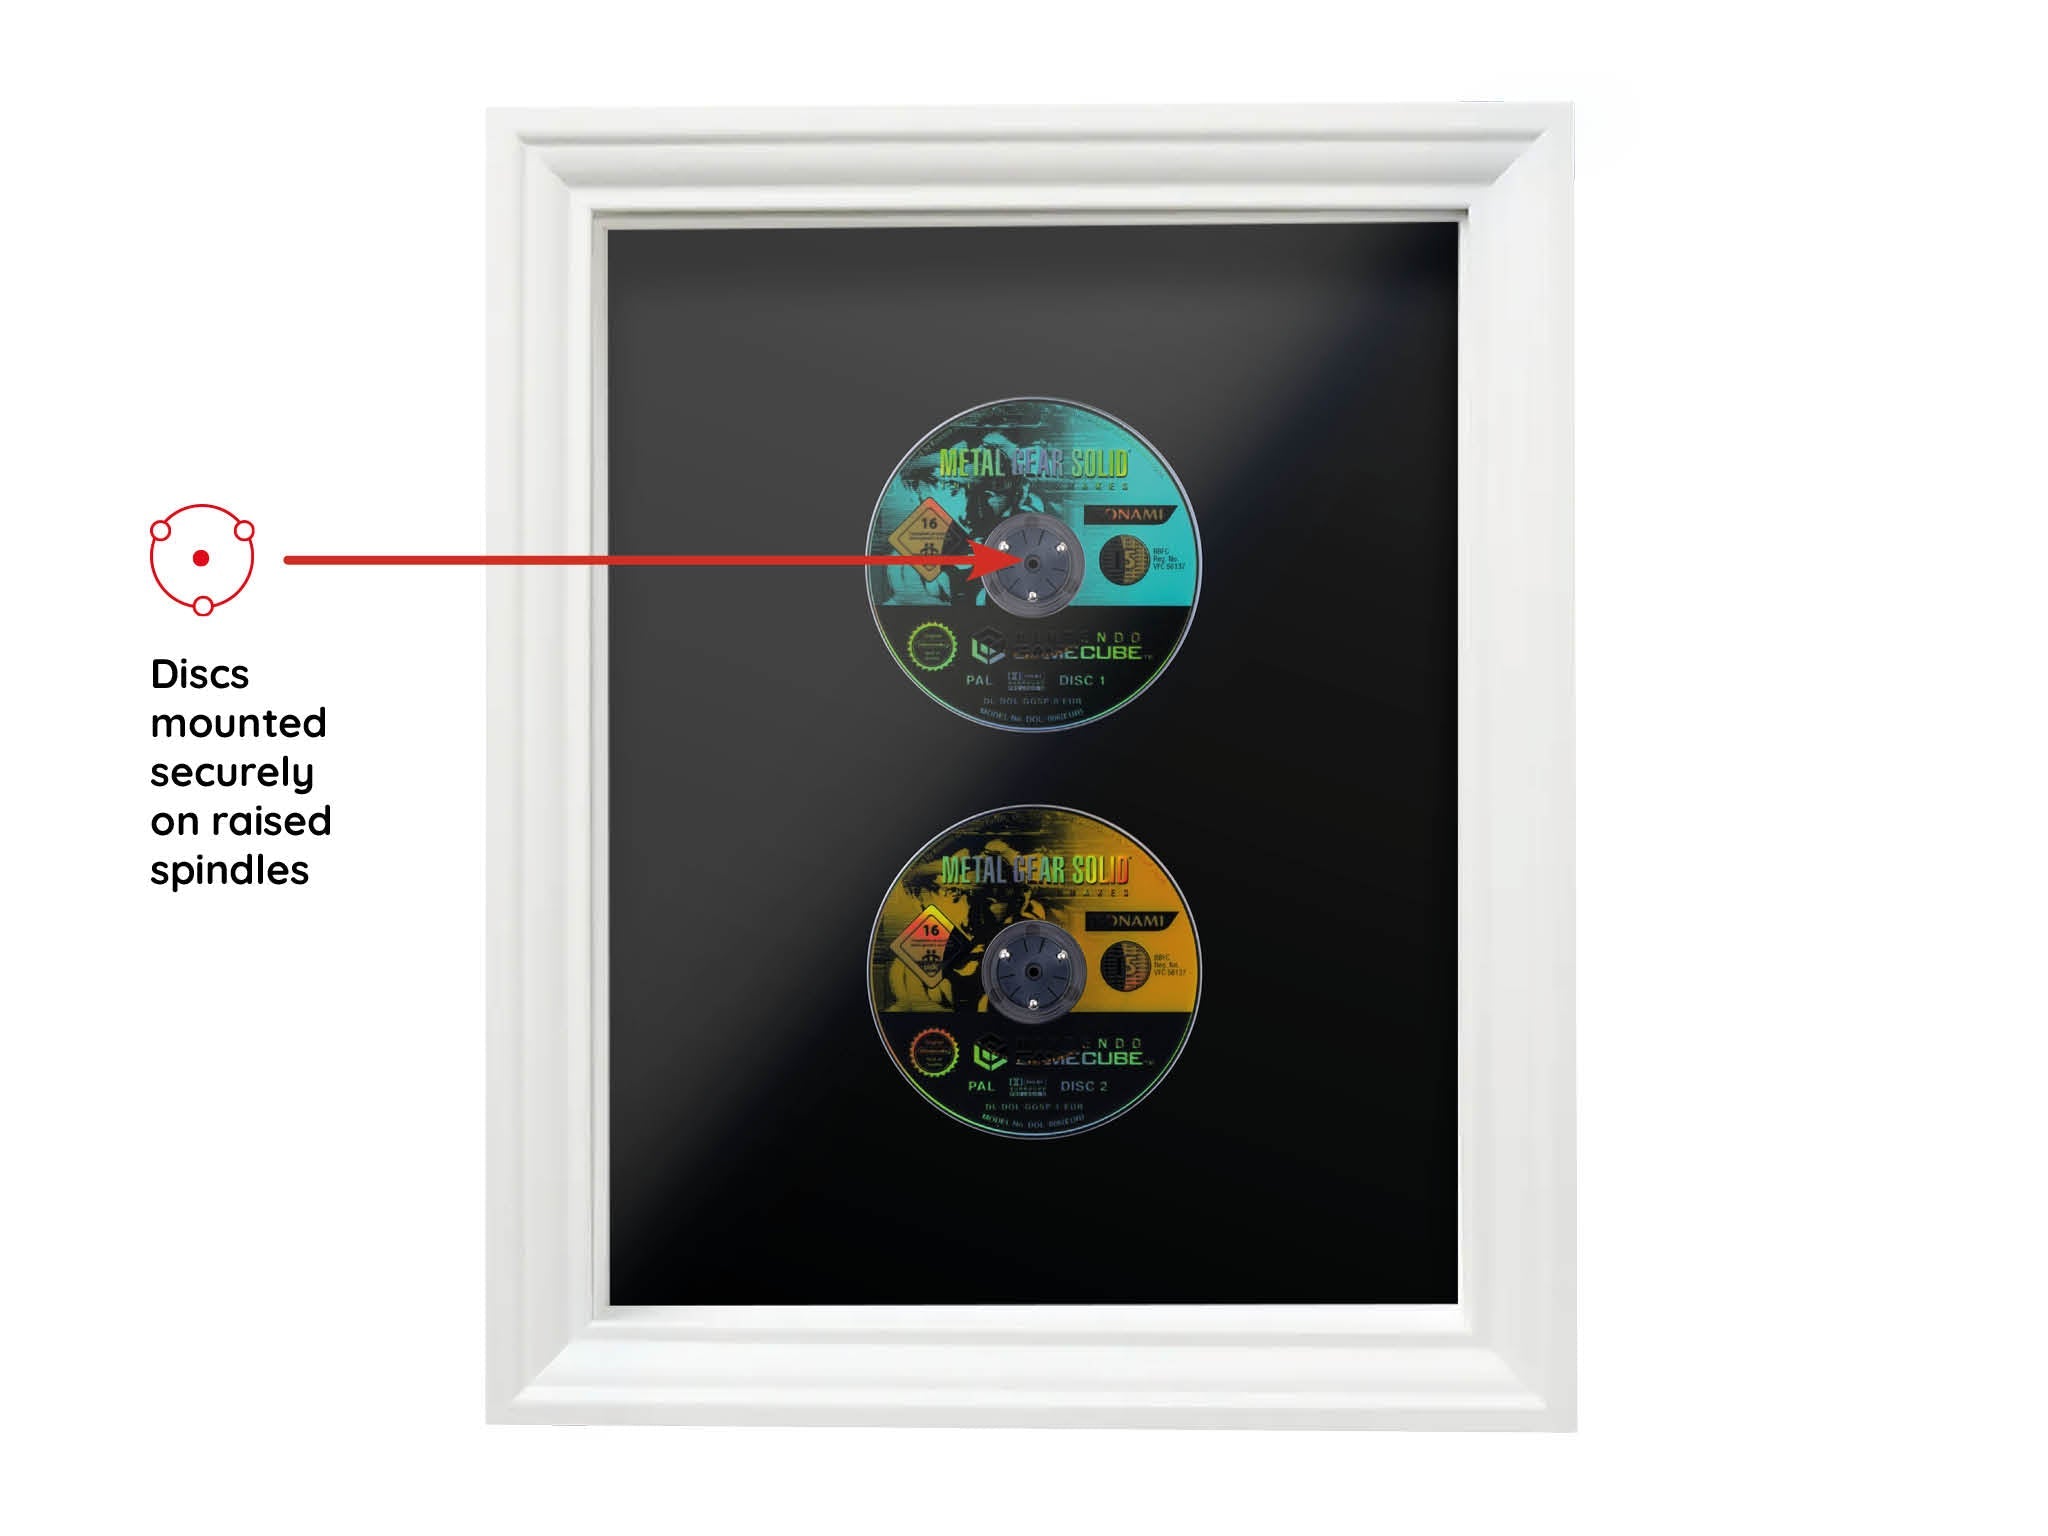 Metal Gear Solid: The Twin Snakes (Showcase Range) Framed Game - Frame-A-Game